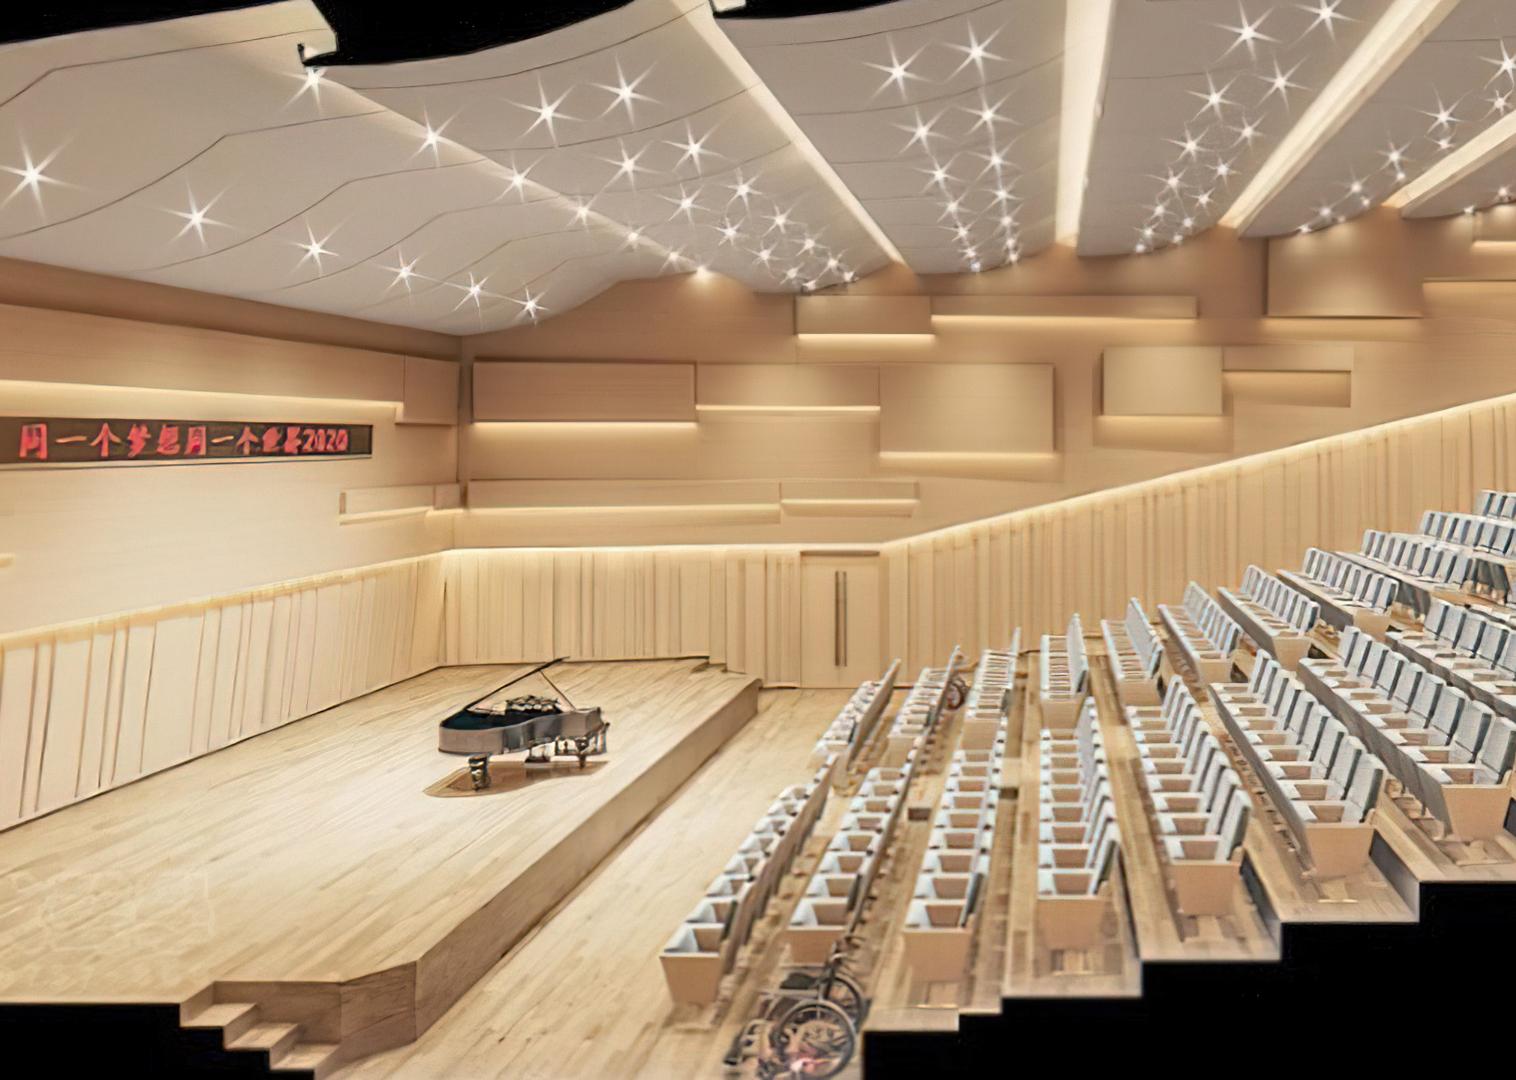 Acoustic Design Project for the Concert Hall of Hunan Shaoyang Kindergarten School